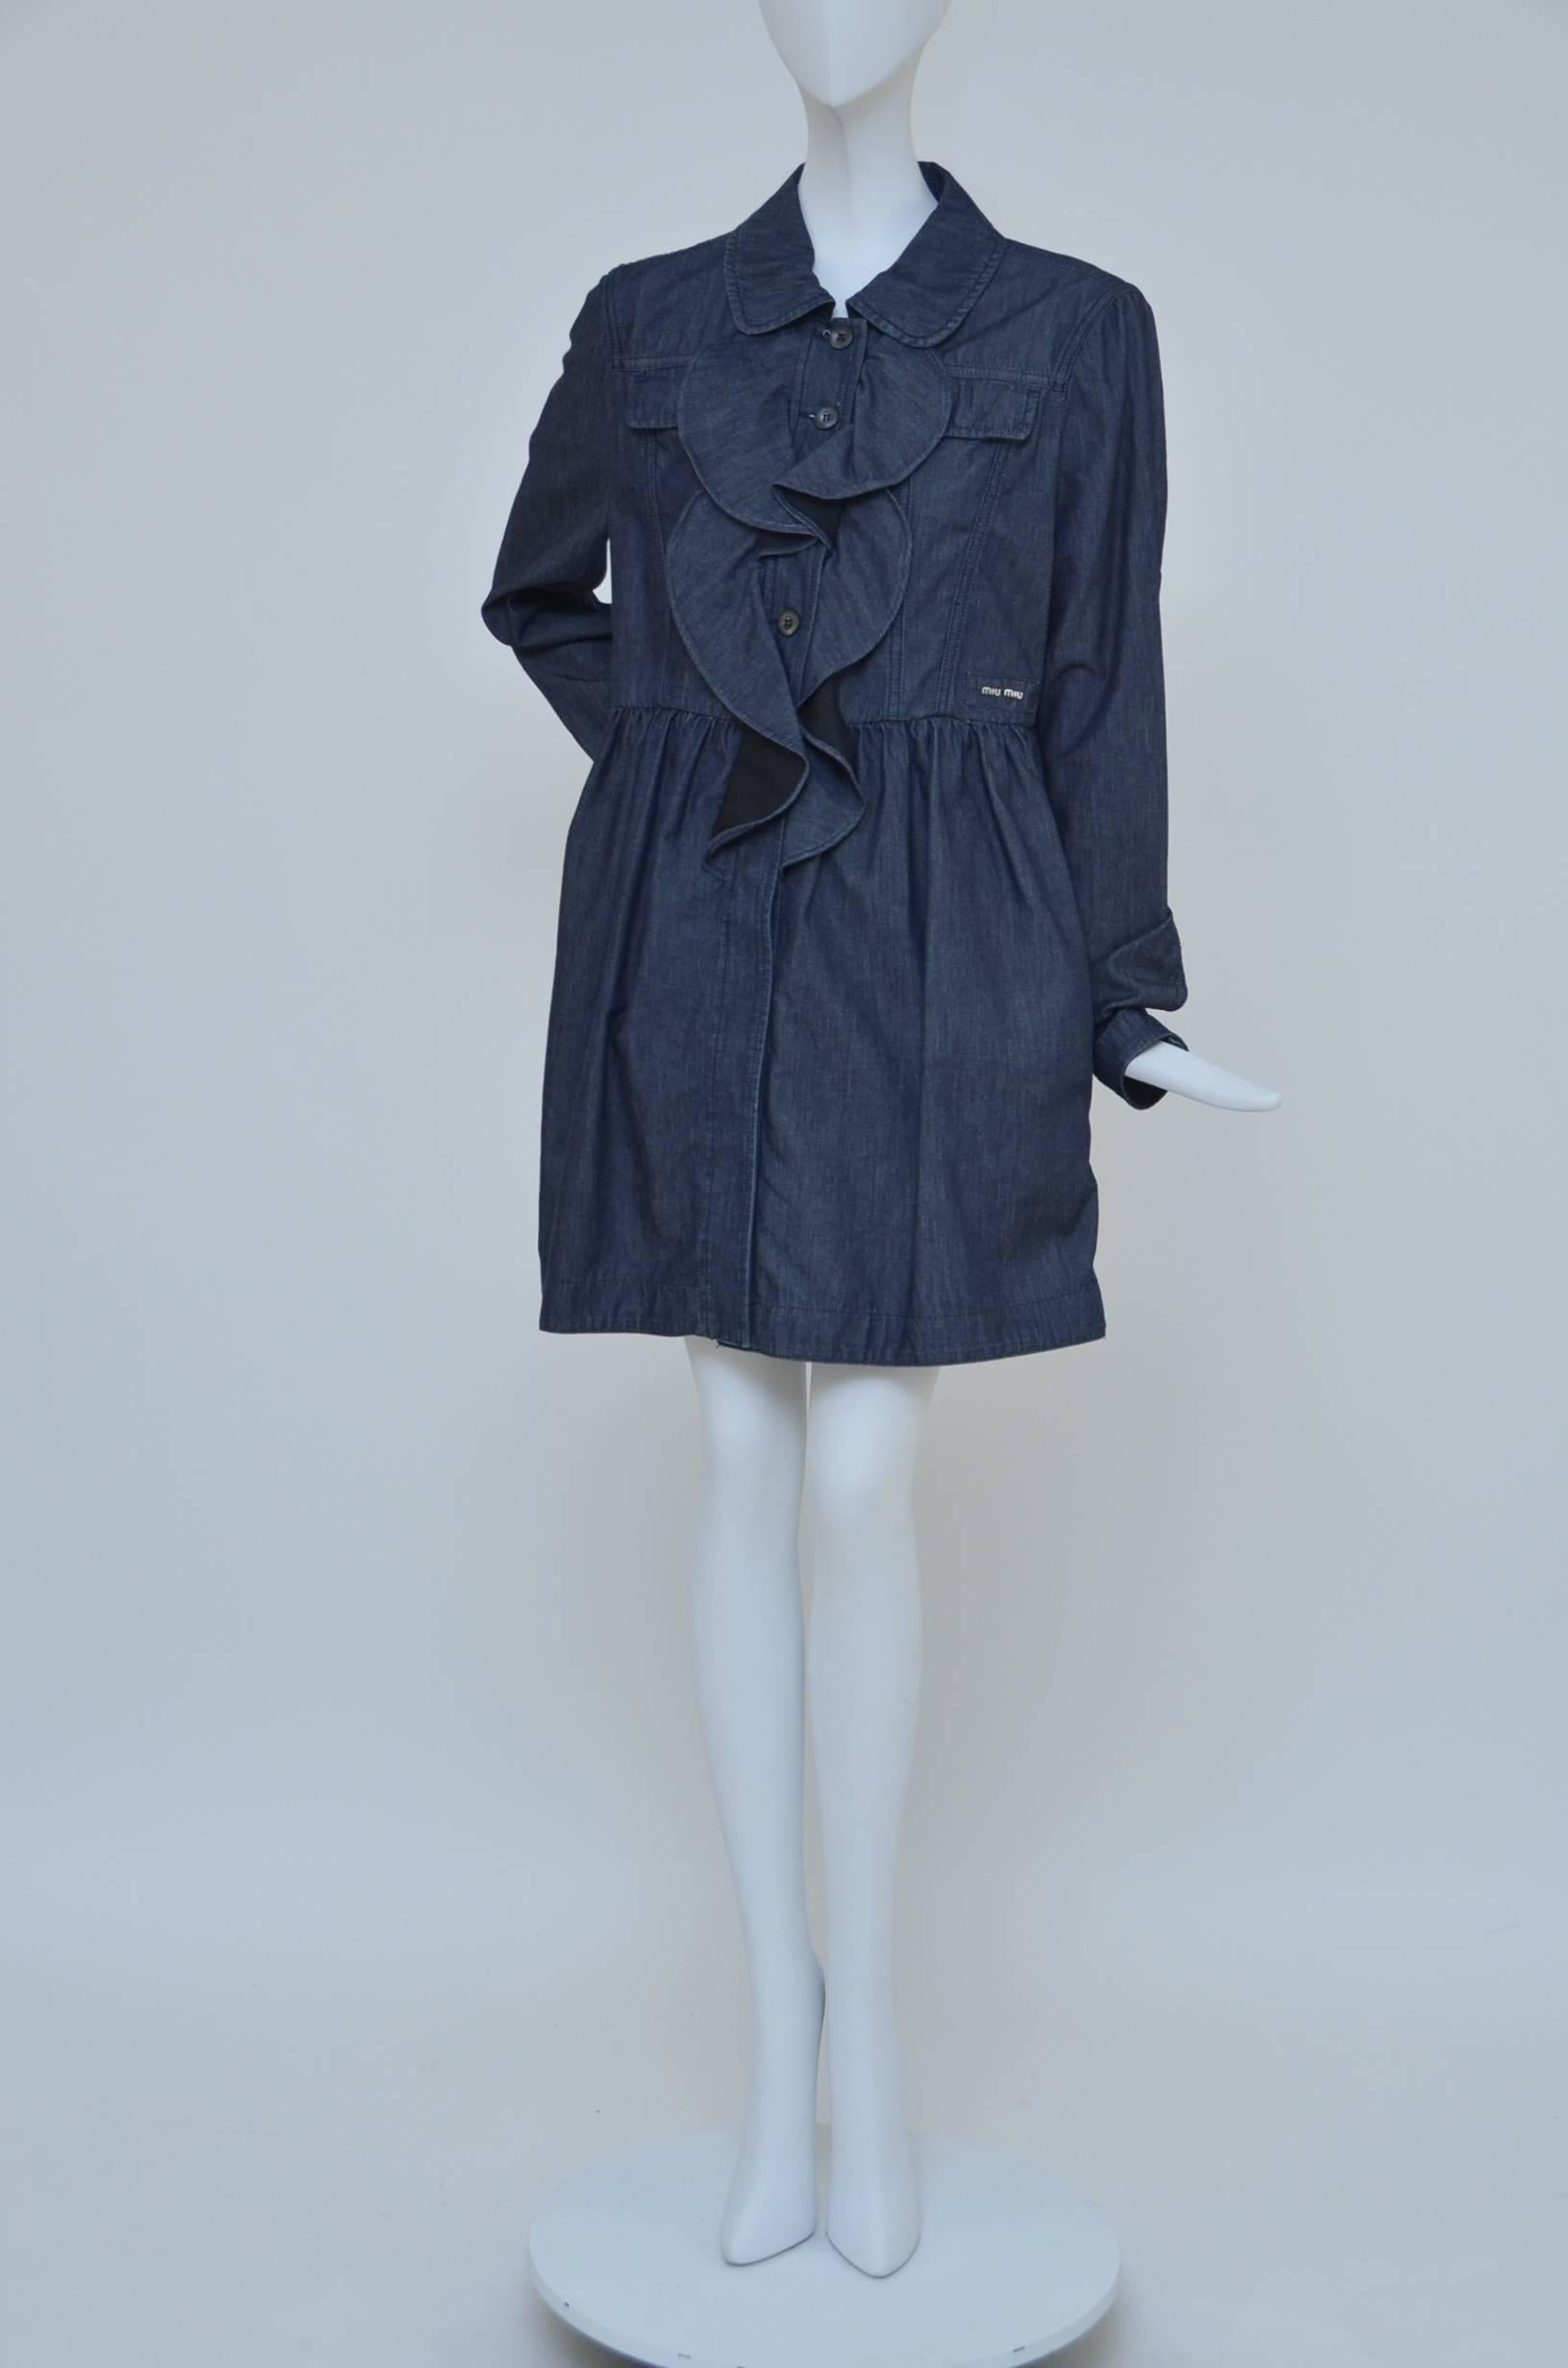 Miu Miu light denim fabric dress or coat.
Very versatile and could be worn as a dress or coat.
4 pockets in the front (2 small on the top and 2 big by waist).
New with tags.Size 44.Made in Italy.
Approx. measurements :Waist17